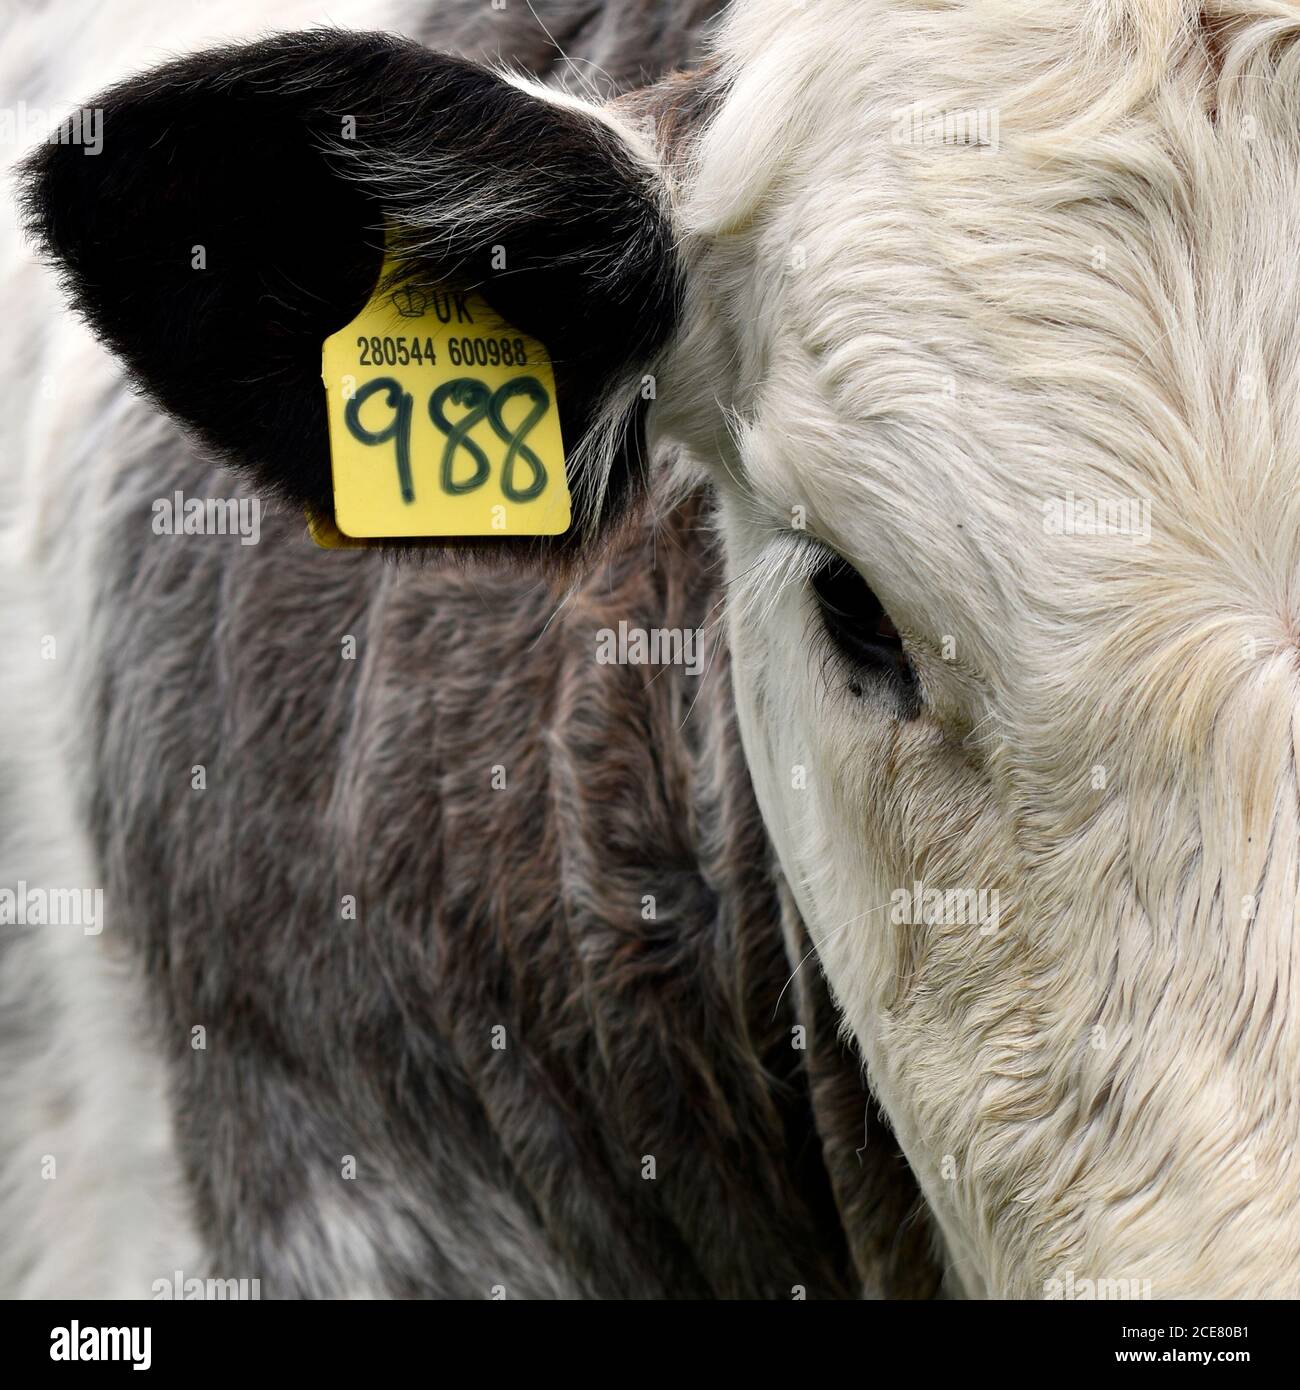 British beef cow calf close up of head, eye, ear and side showing yellow farming cattle ID tag with numbers. Stock Photo